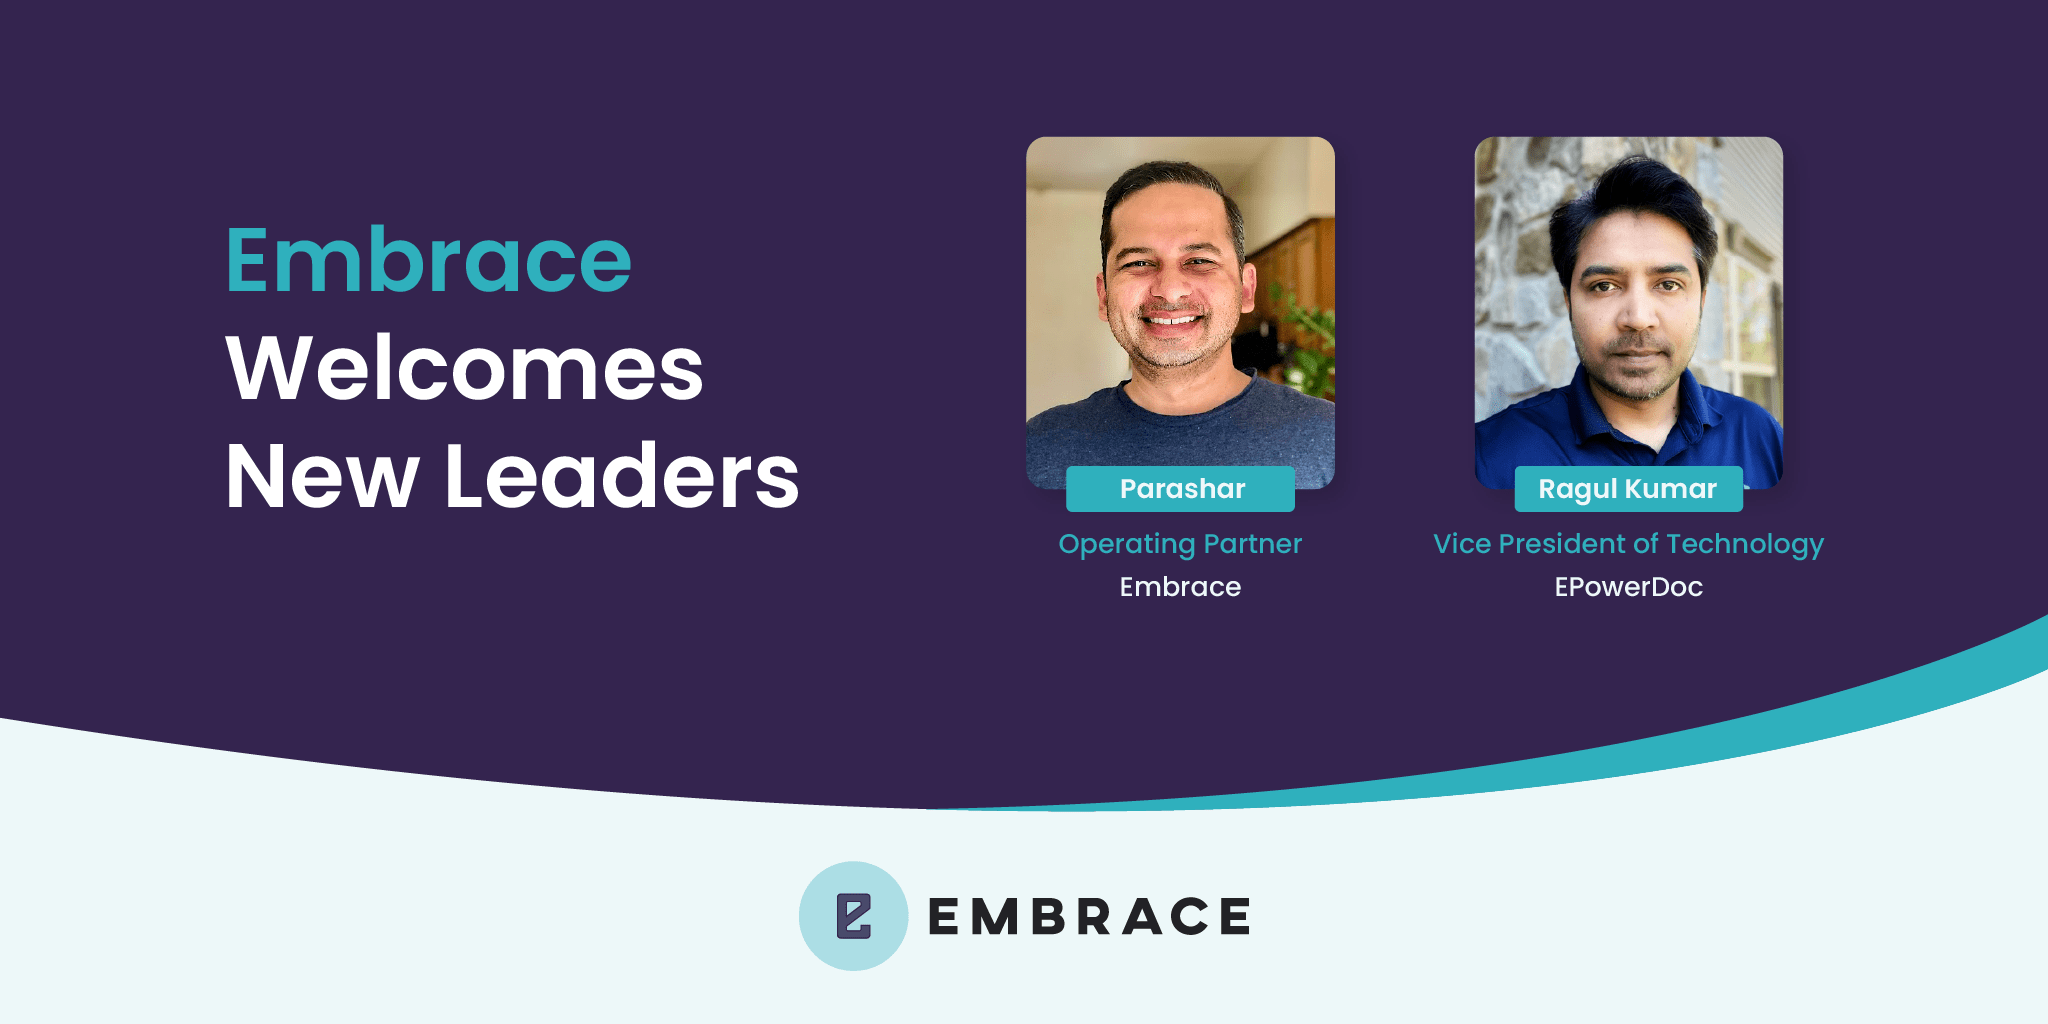 Embrace Welcomes New Leaders from Microsoft and FIS to Enhance Operations and Drive Technological Innovation